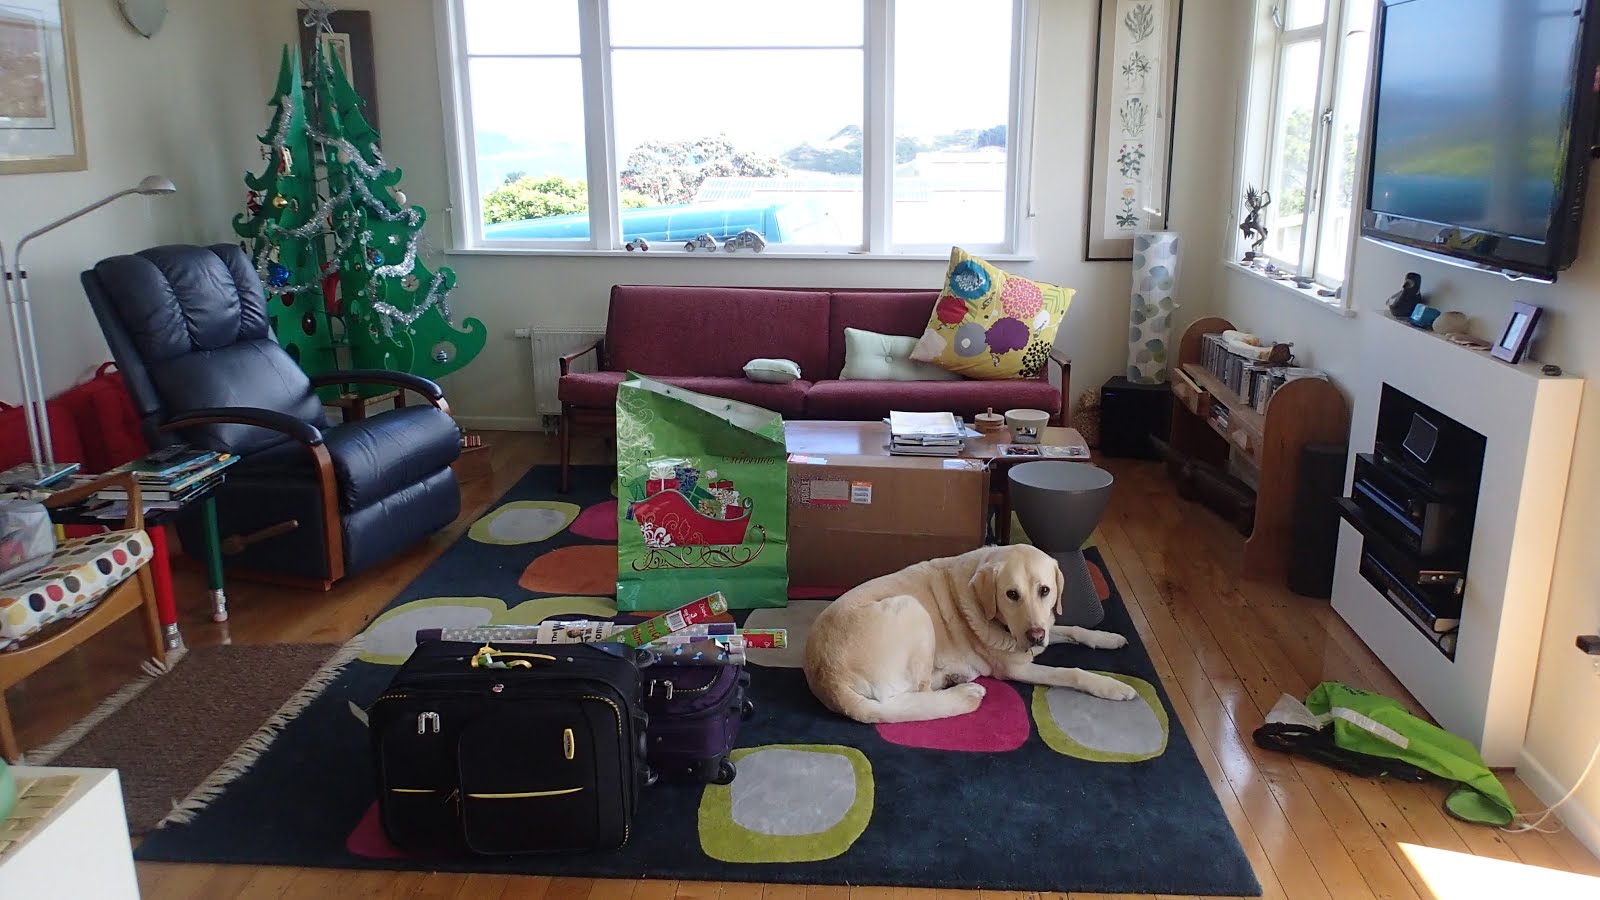 The South Island branch came up for Christmas, with retired guide dog Vincent